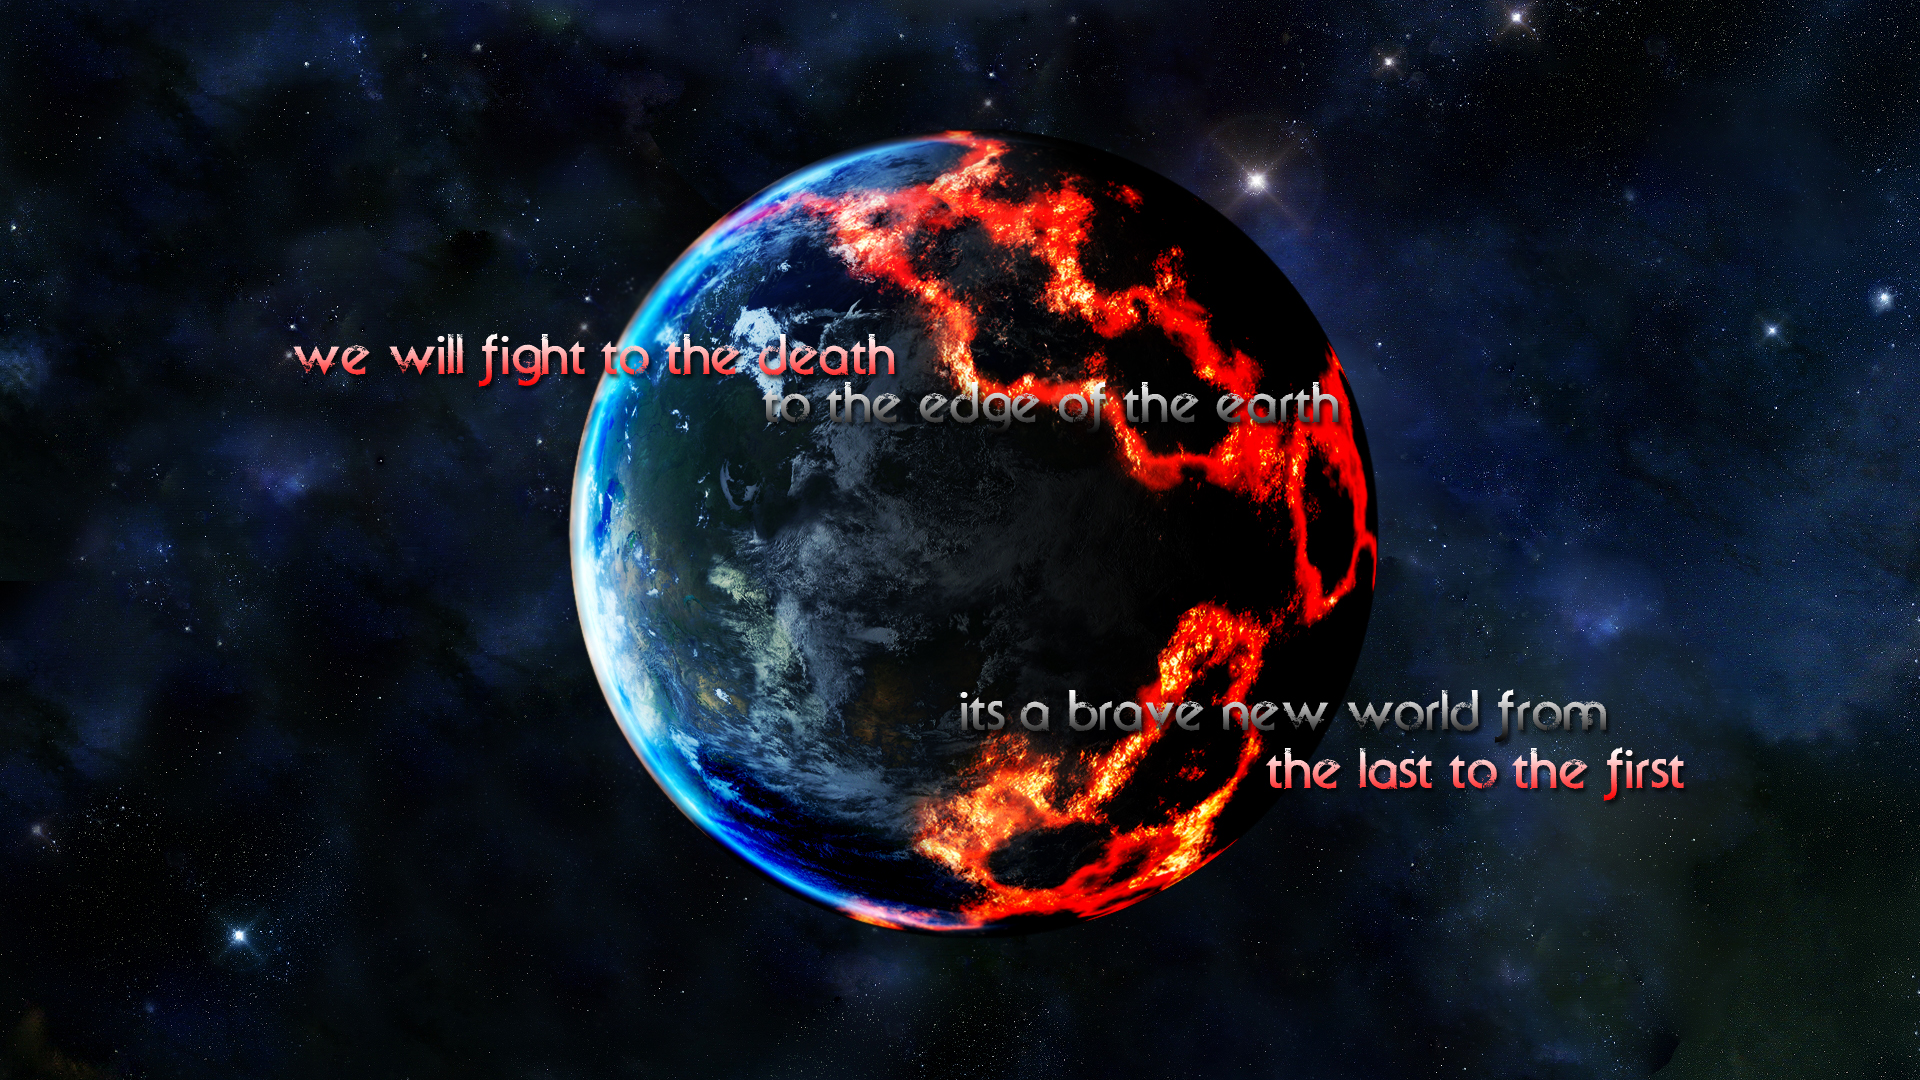 30 Seconds to Mars - Earth by sashley46 on DeviantArt